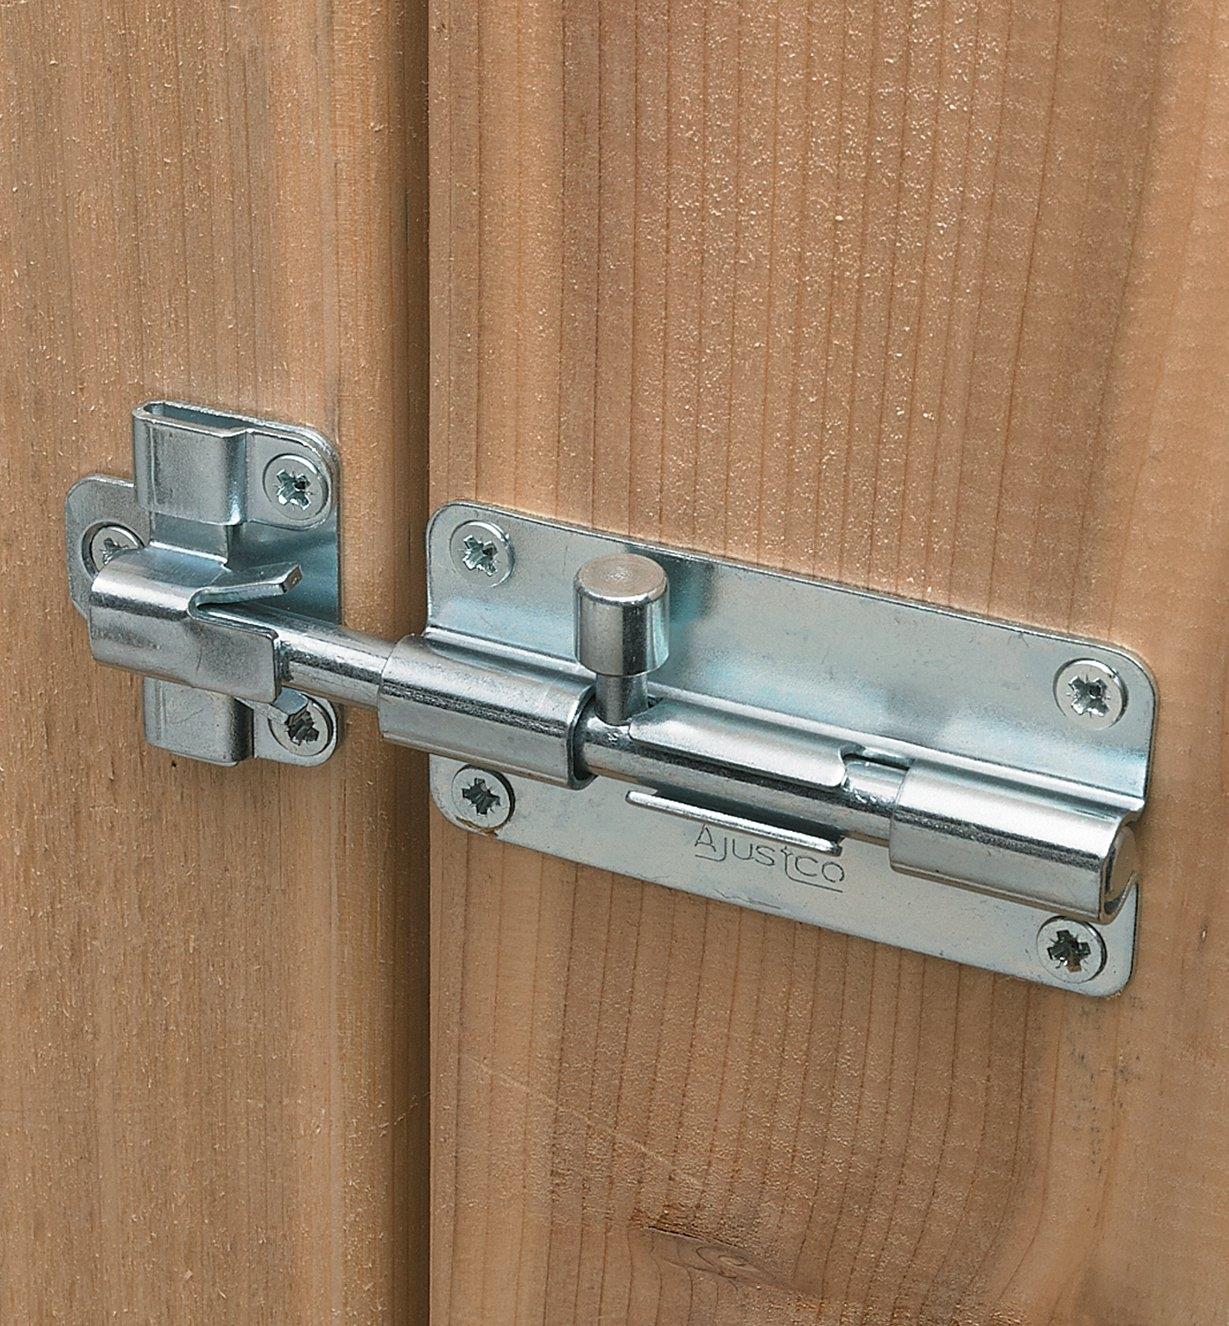 4" Self-Aligning Bolt mounted on a gate